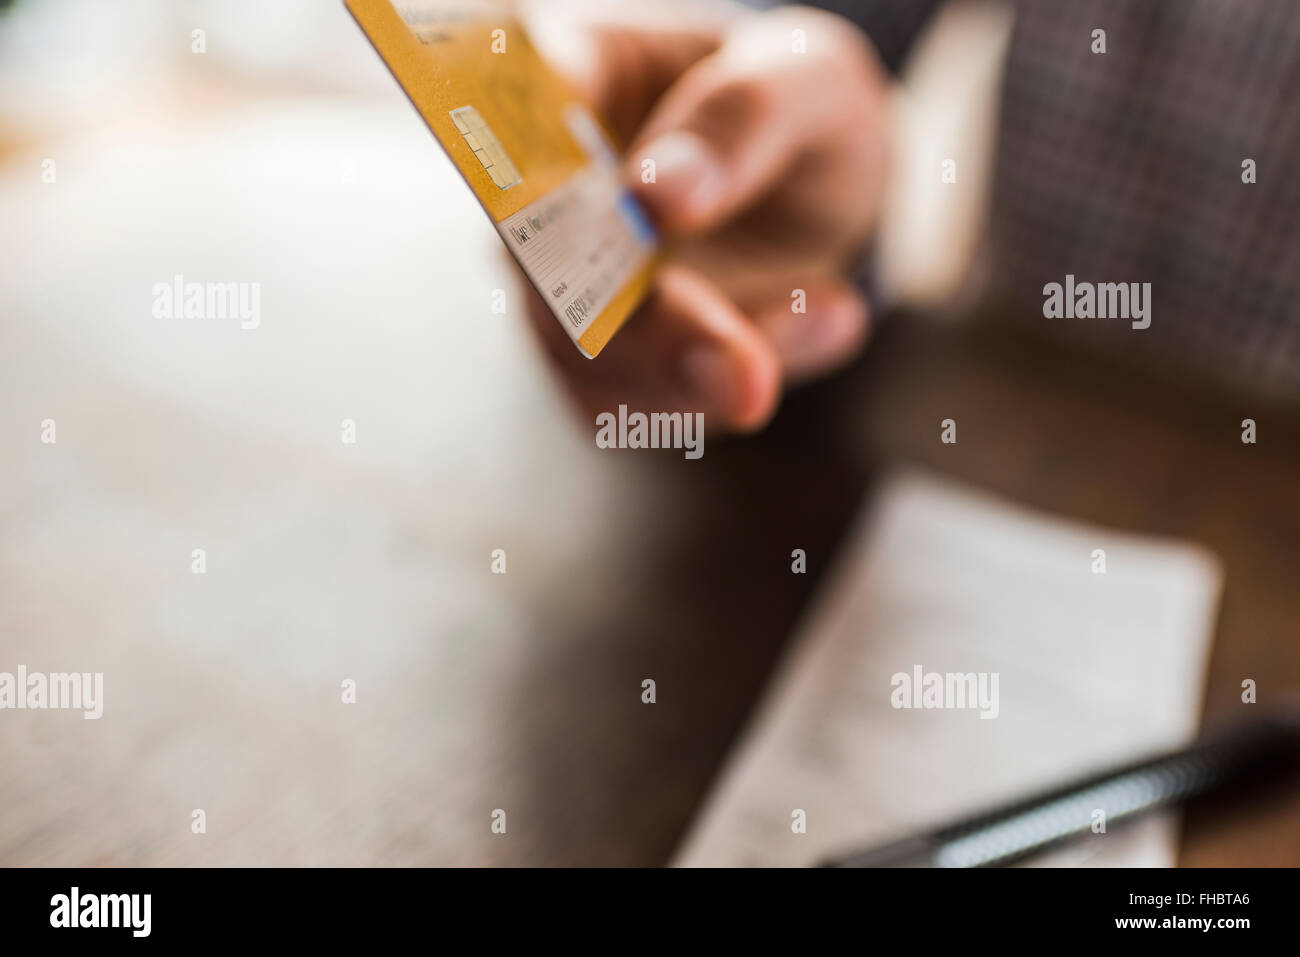 Close-up of hand holding credit card Banque D'Images